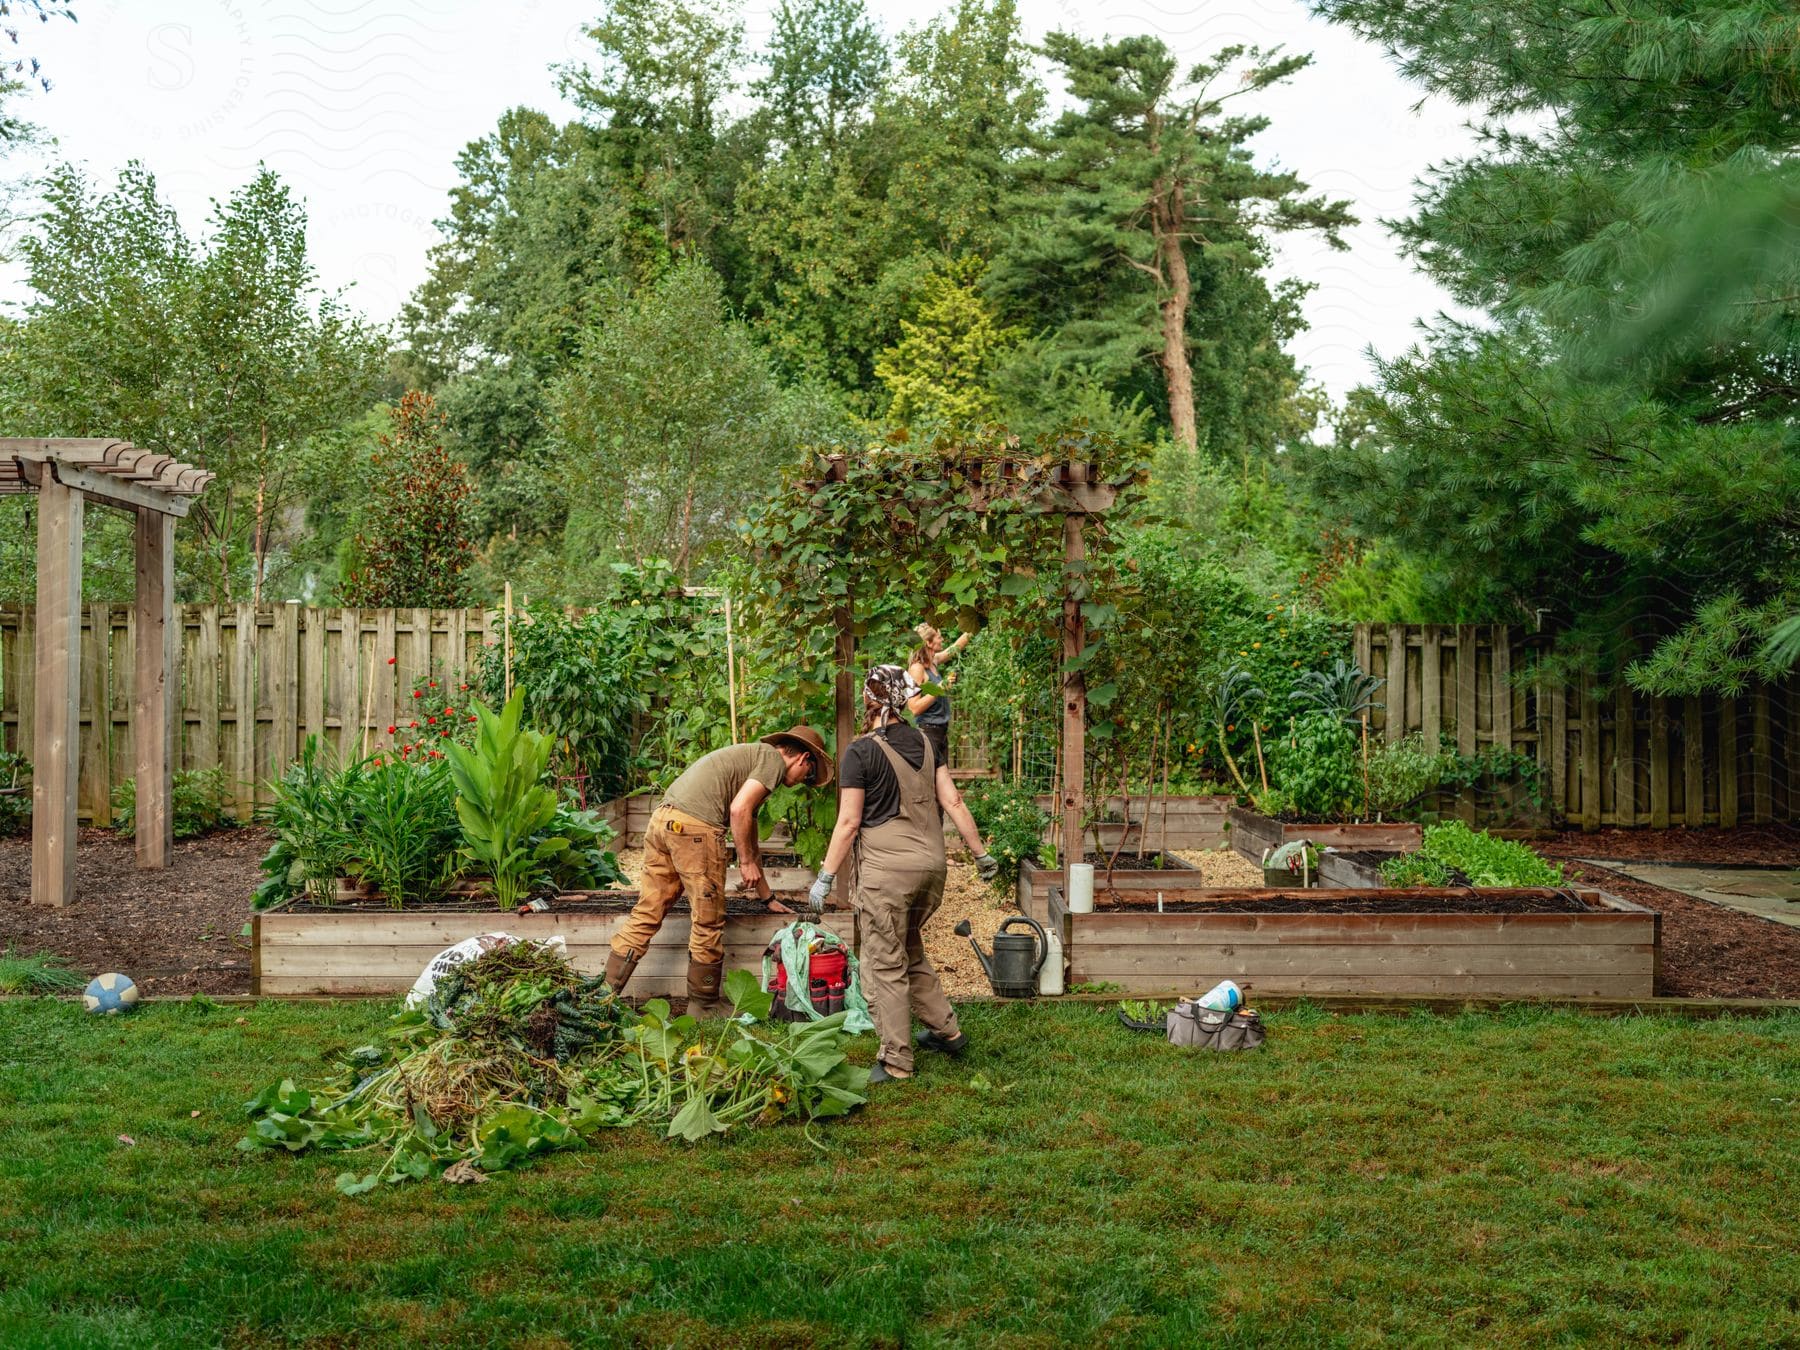 Three people two men and a woman are gardening and planting new plants in a large garden